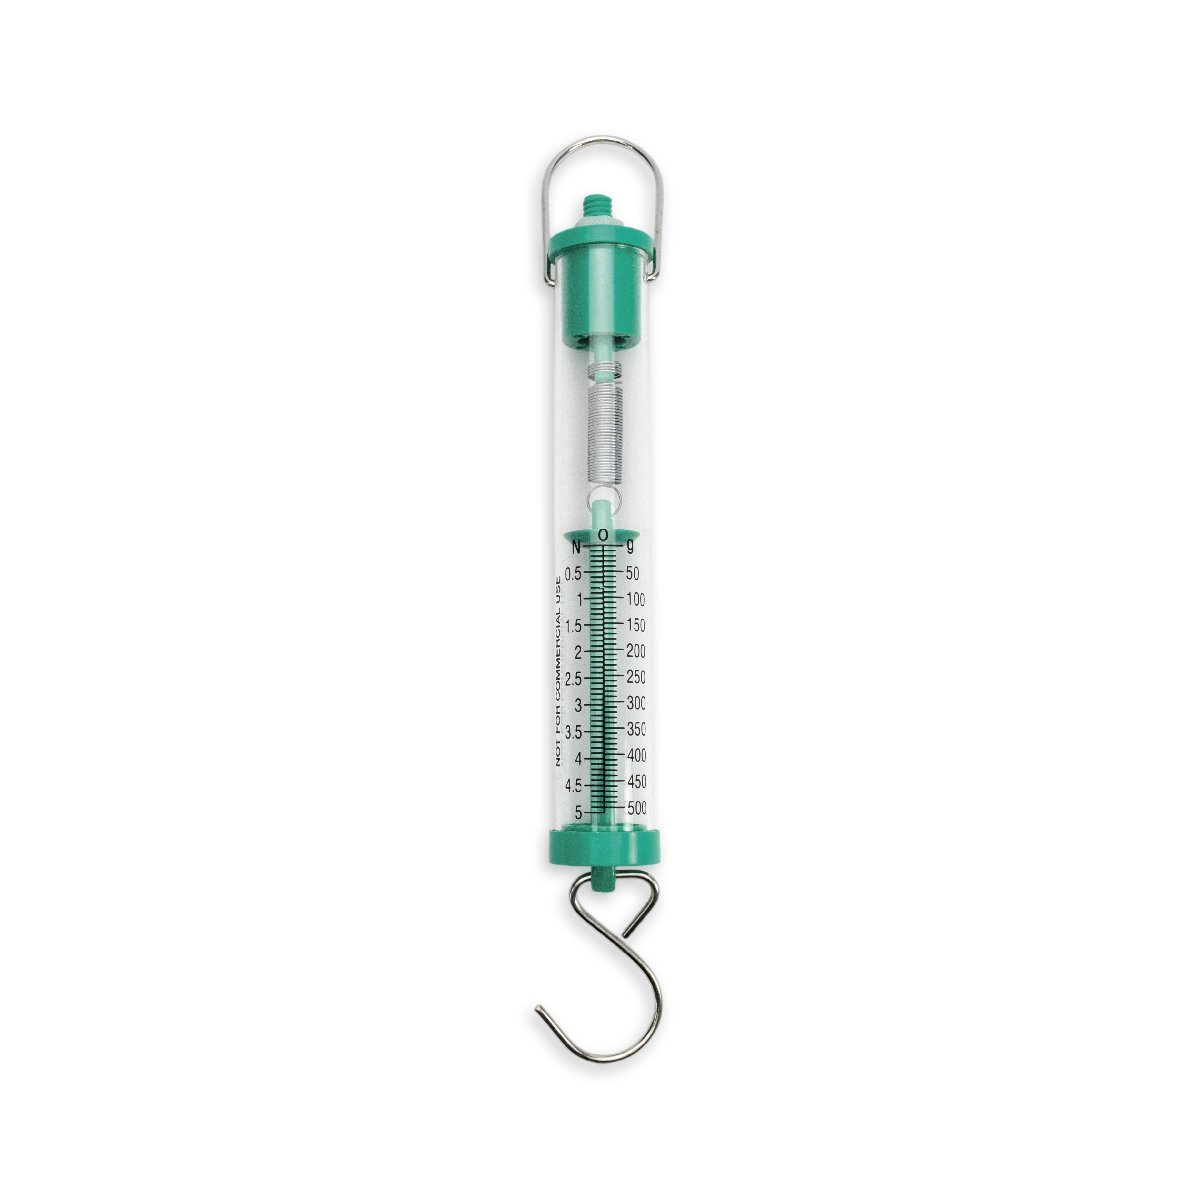 Wholesale spring scale For Precise Weight Measurement 